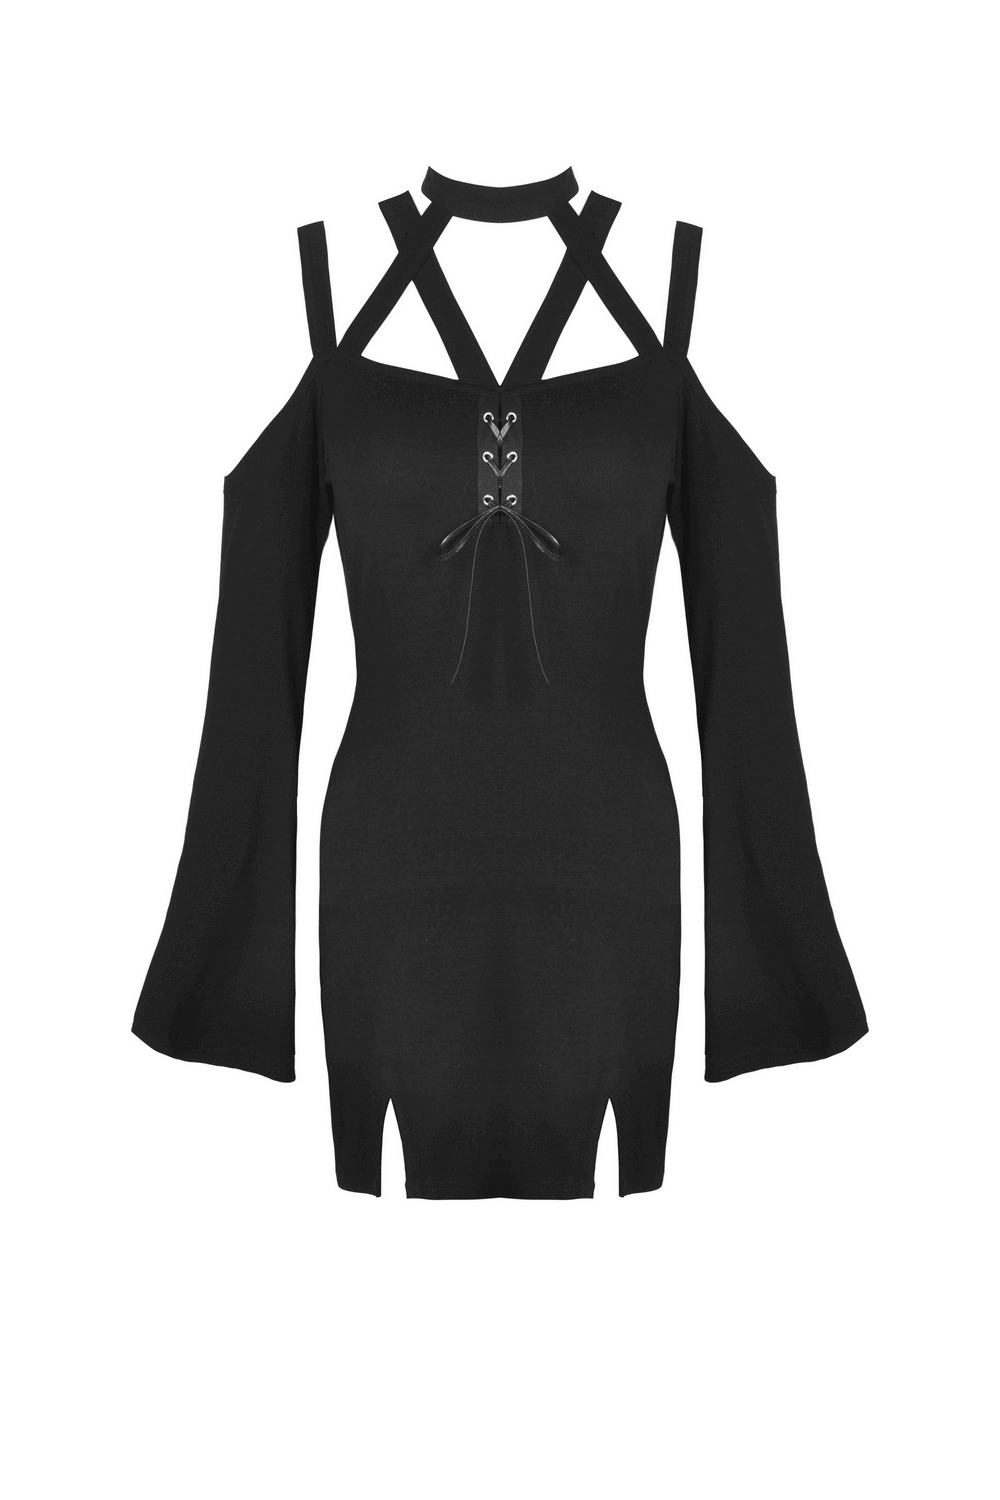 Dark Gothic Lace Up Mini Dress with Shoulder Cutouts